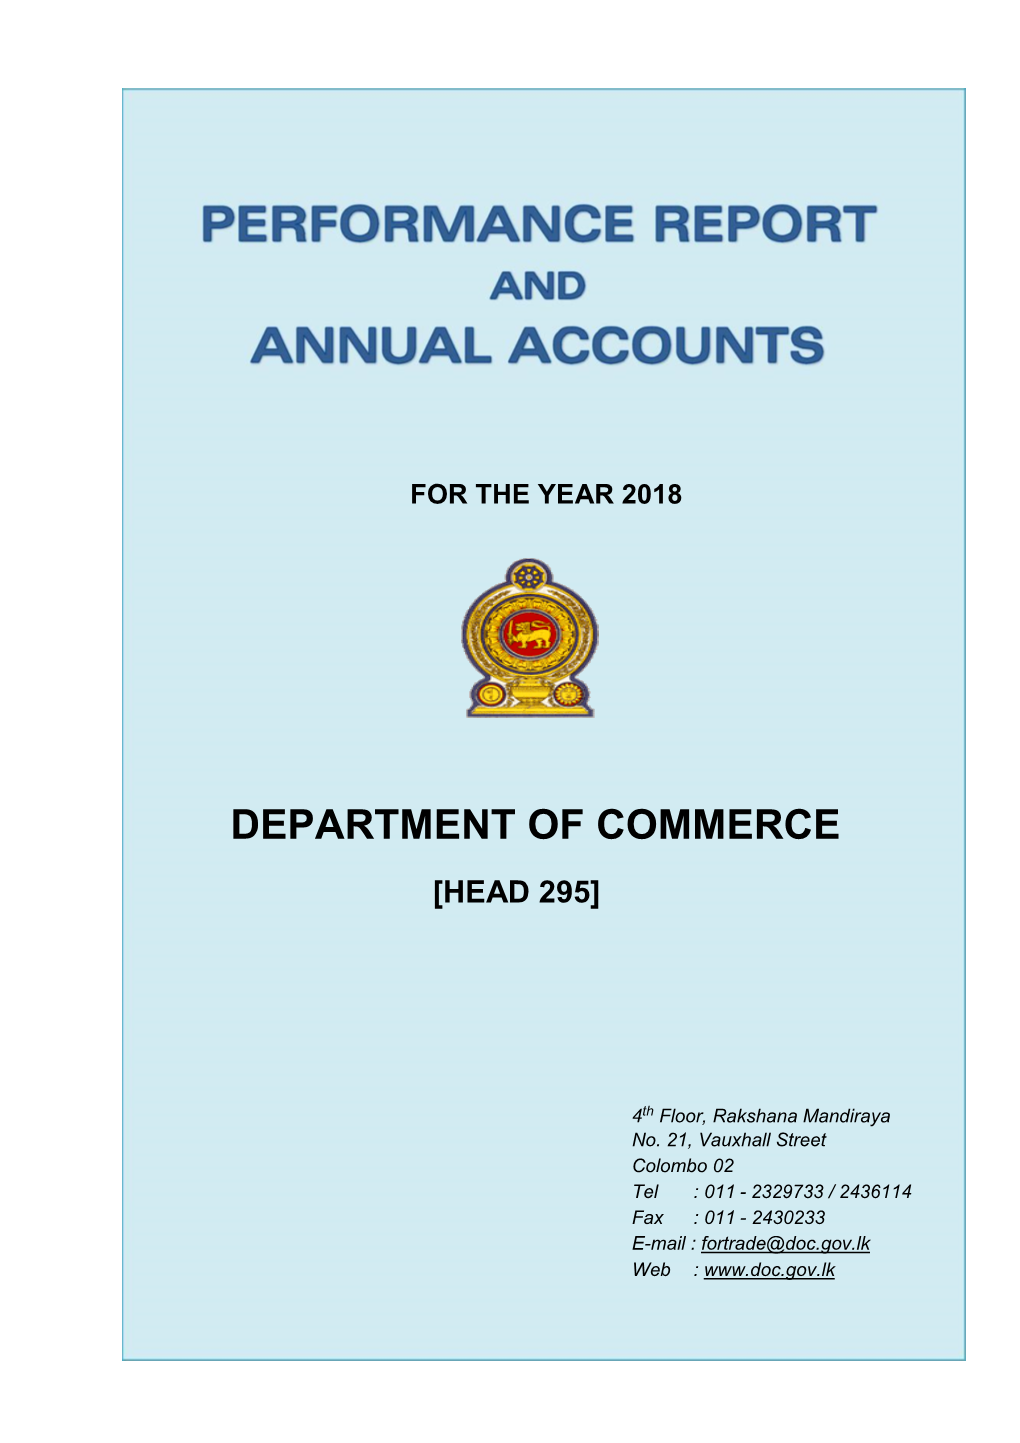 Performance Report and Annual Accounts of the Department of Commerce for the Year 2018